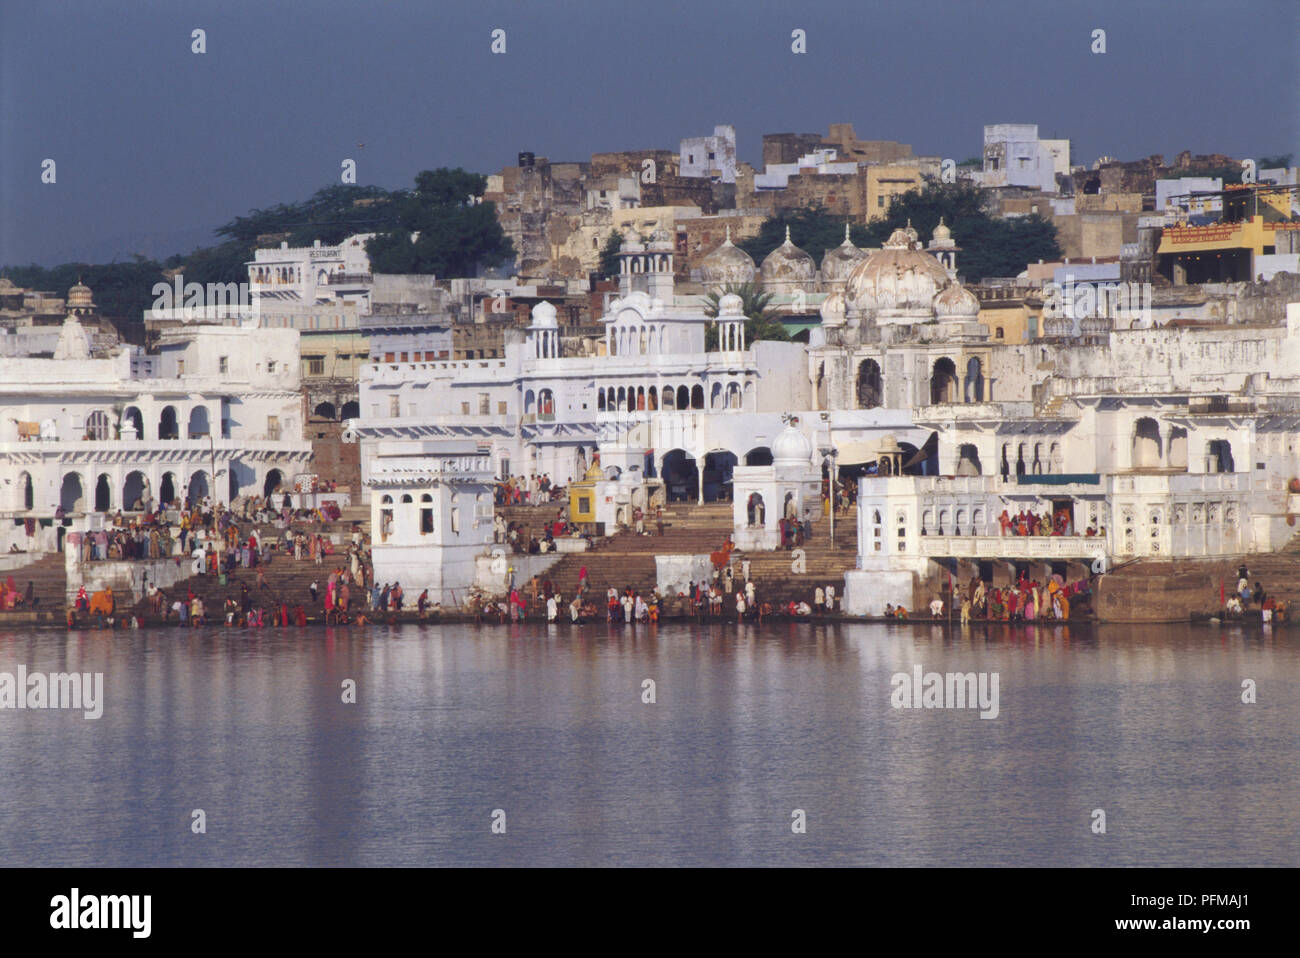 India, Pushkar, ghats beside river, devout Hindu pilgrims bathing in holy ghats to cleanse sins, many people at water's edge reflecting in river, steps leading up to white buildings and mosques on hillside. Stock Photo